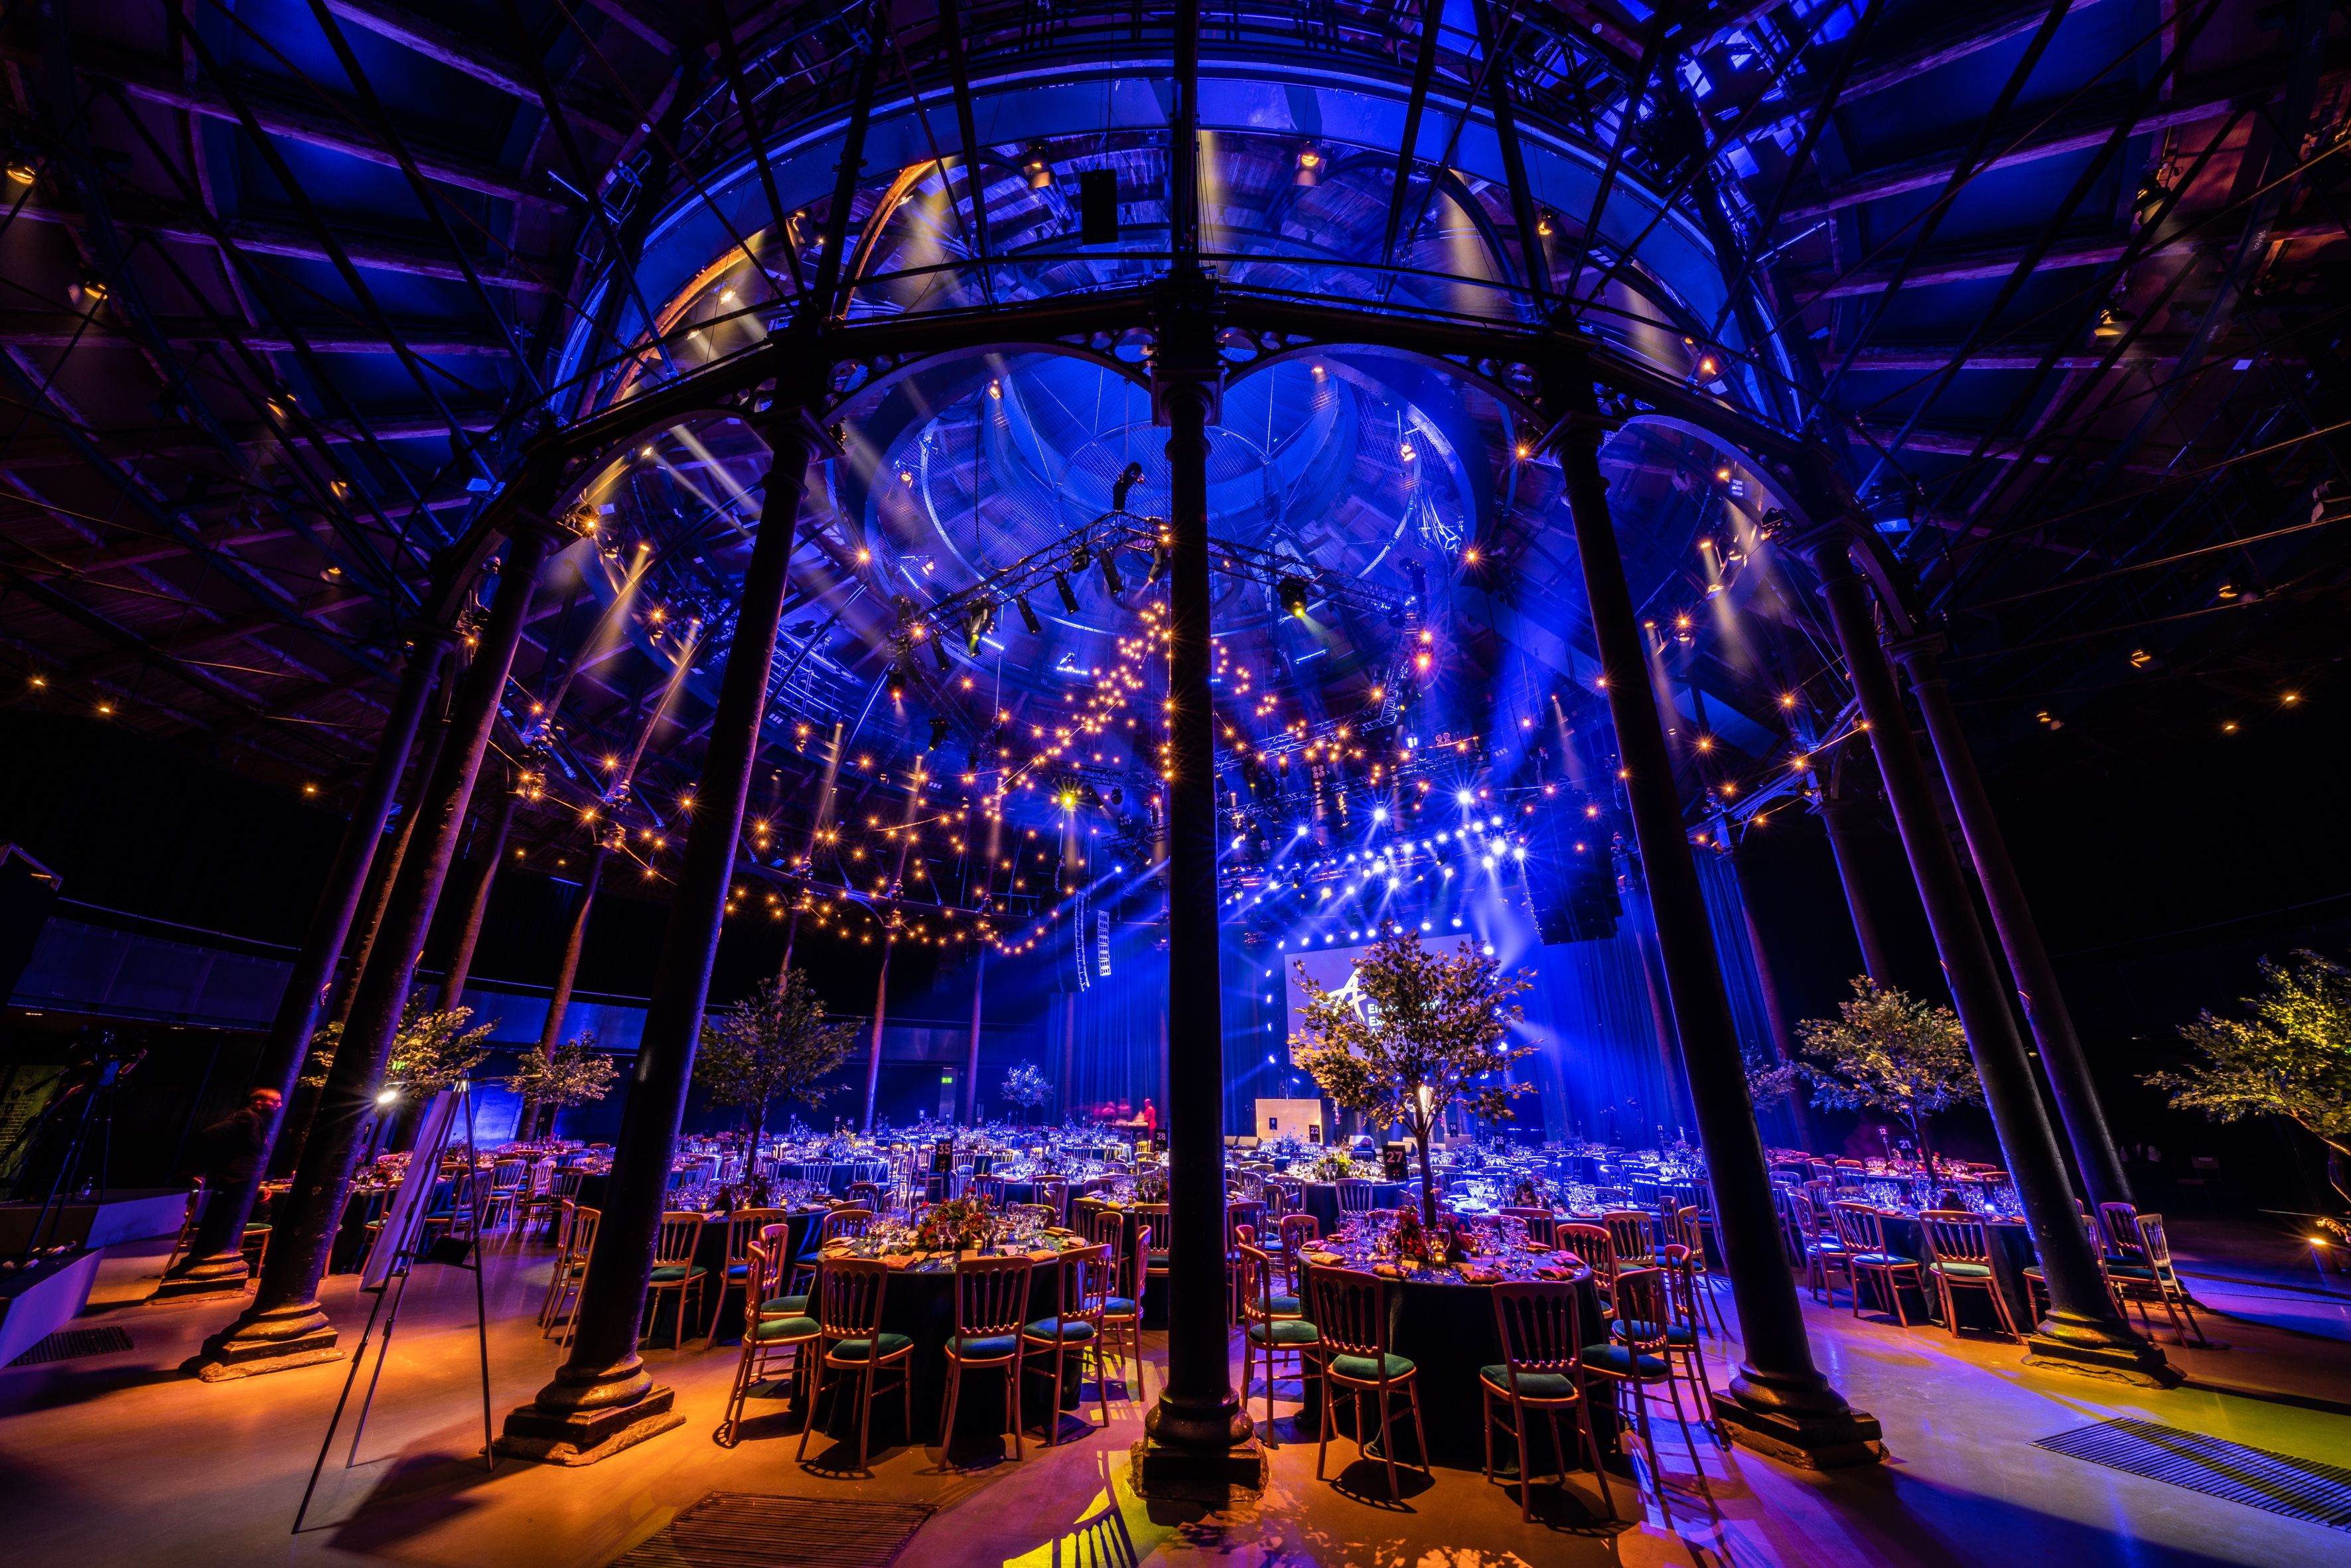 Roundhouse announces new catering supplier cohort with diversity at the heart